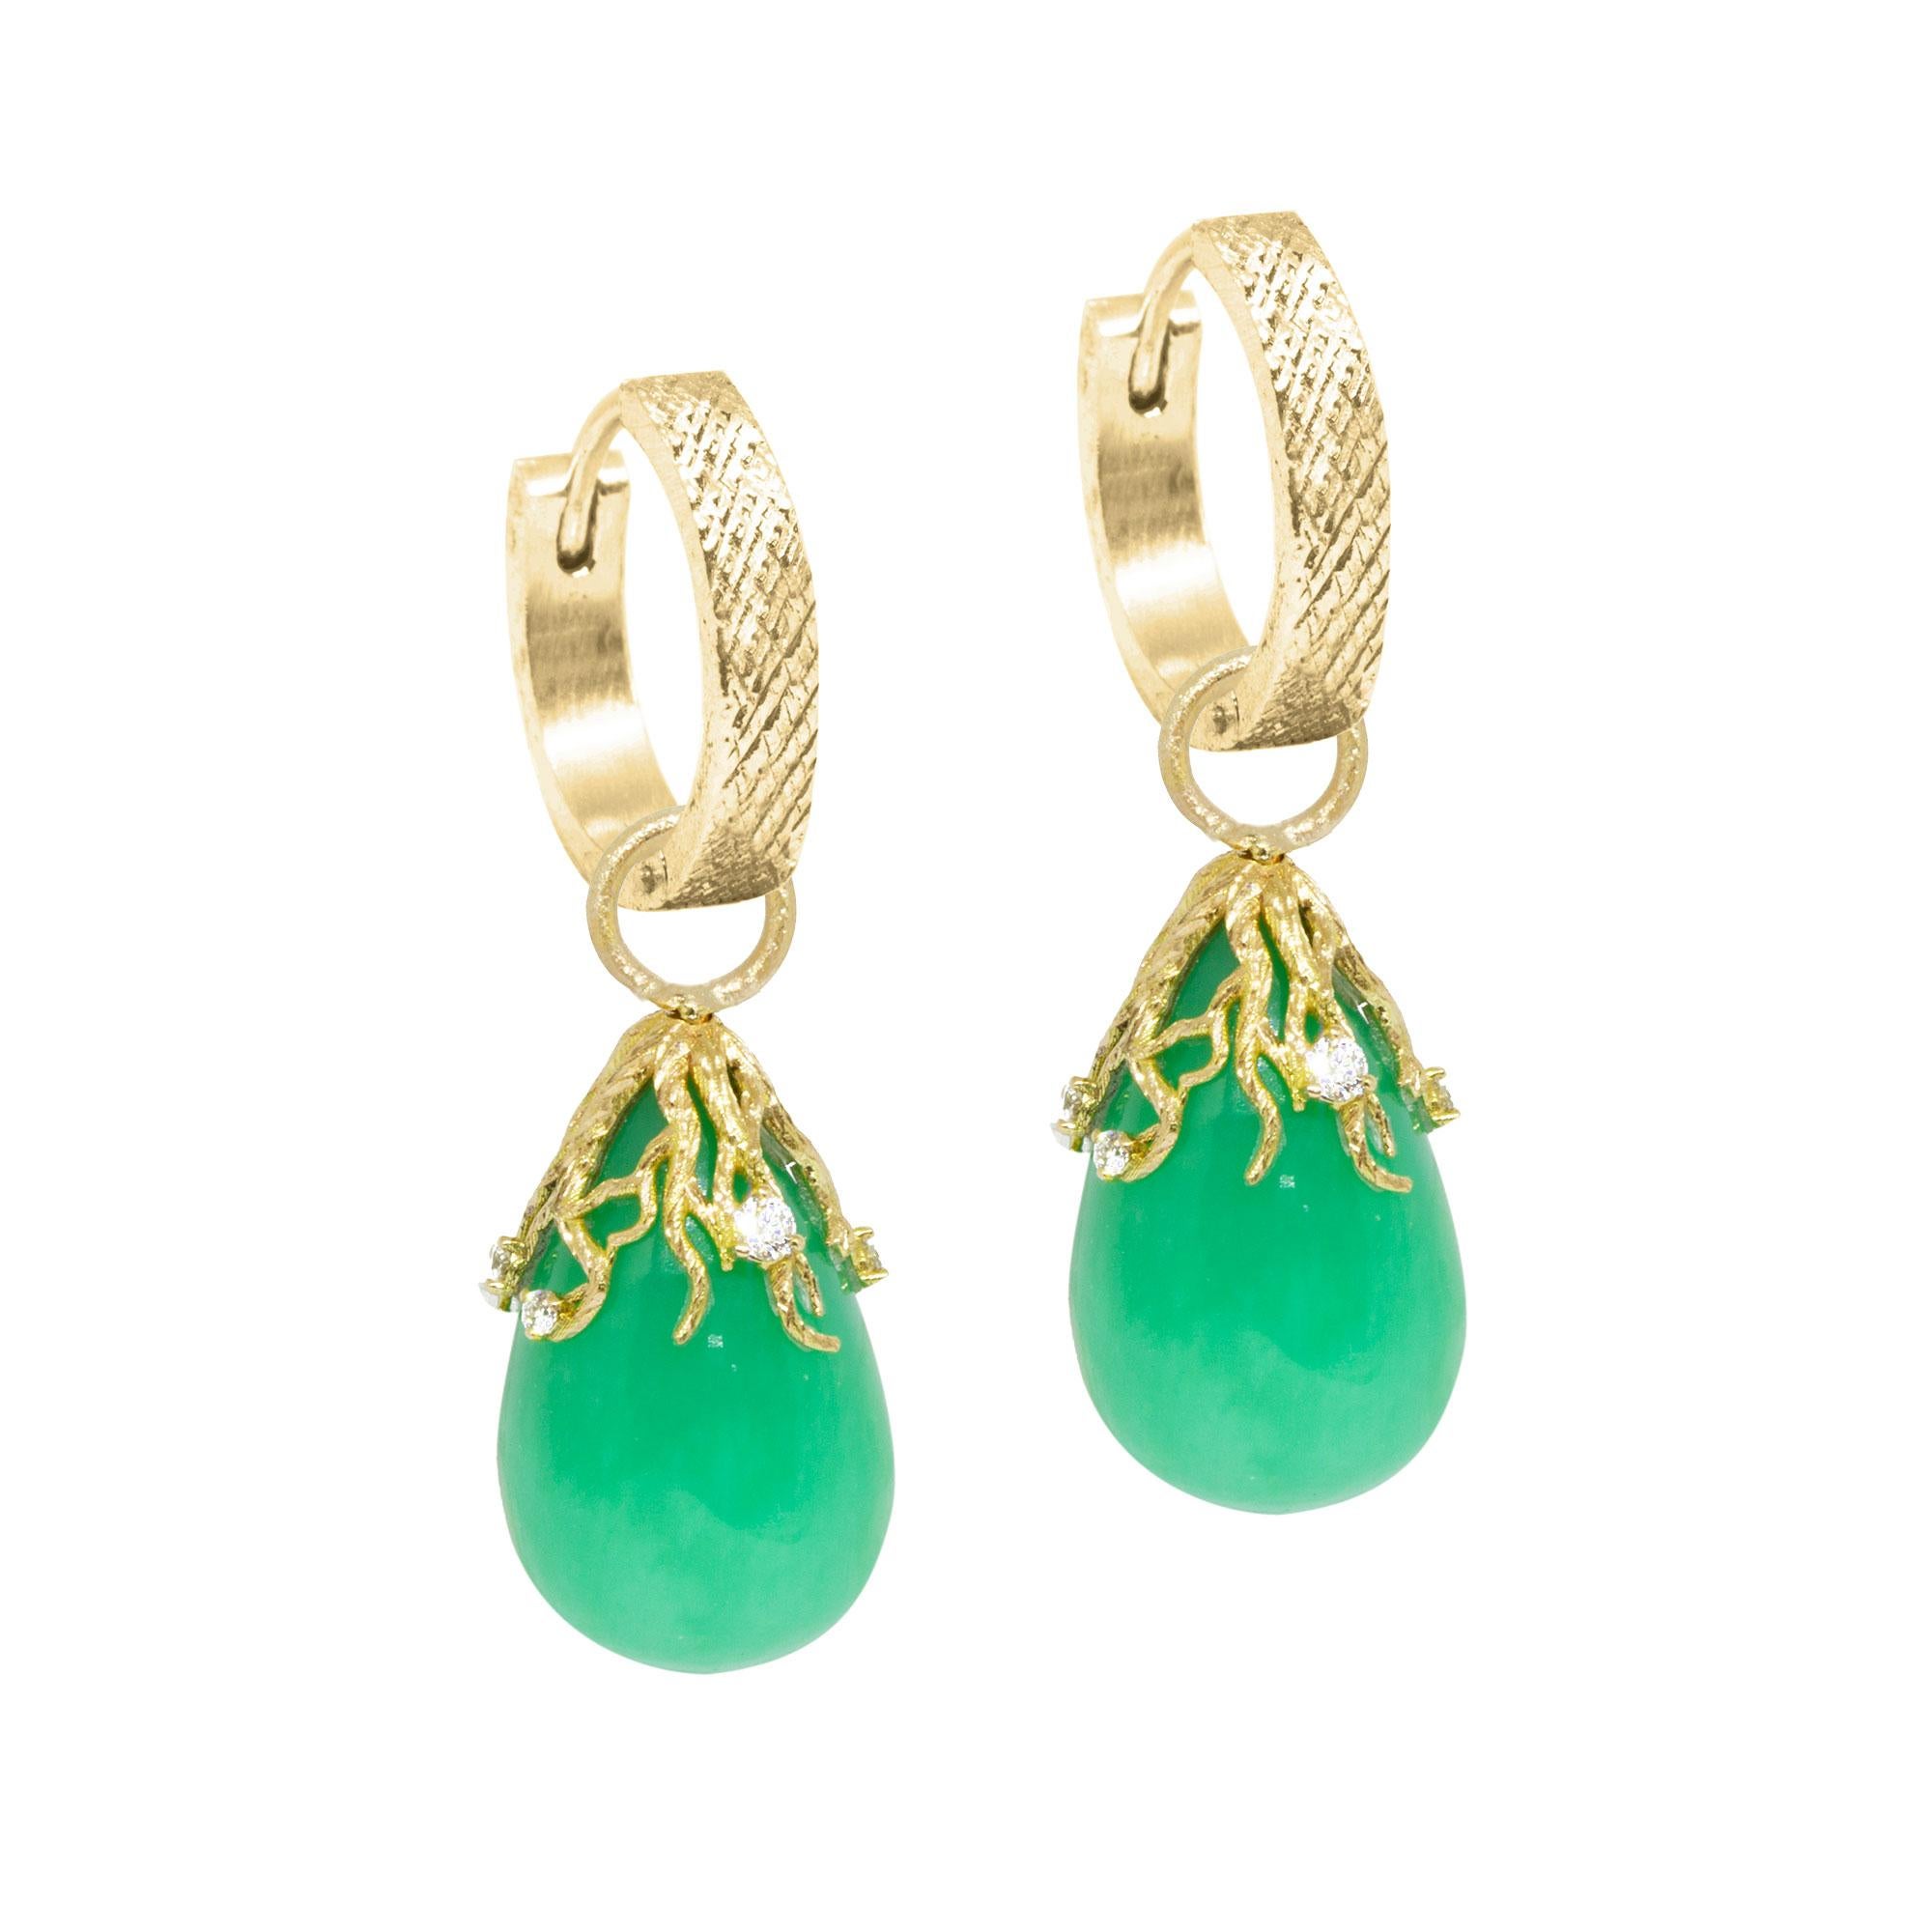 With rich, regal Chrysoprase, our Rooted Gold Earring Charms make the perfect addition to any hoops or charms.
Nina Nguyen Design's patent-pending earrings have an element on the back of the stud or charm to allow these pieces to transformed into